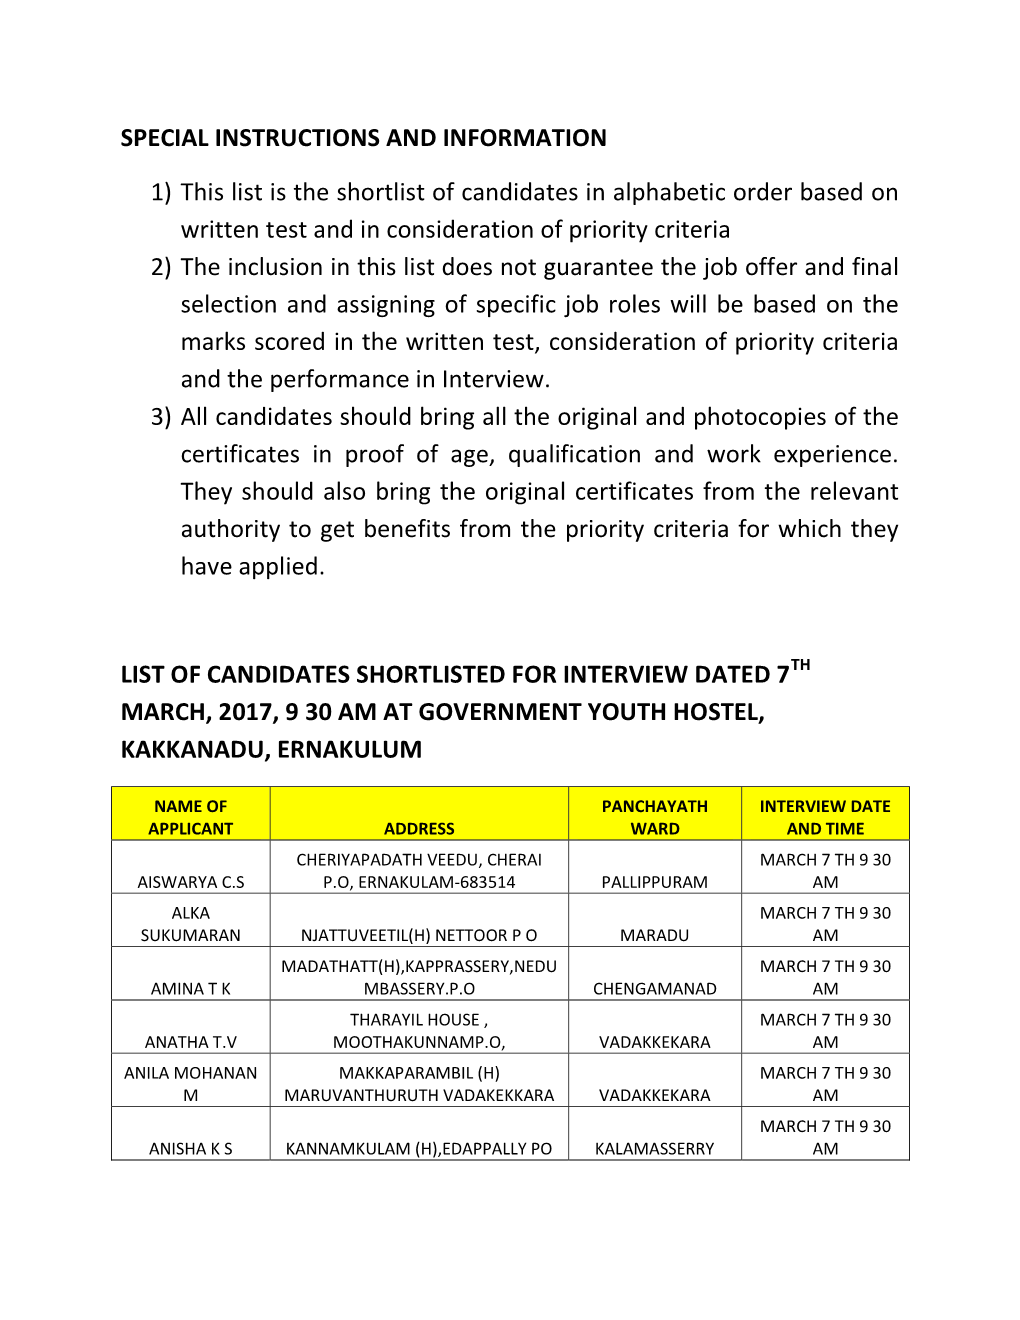 Shortlisted/Selected Candidates for the Interview for Kochi Metro